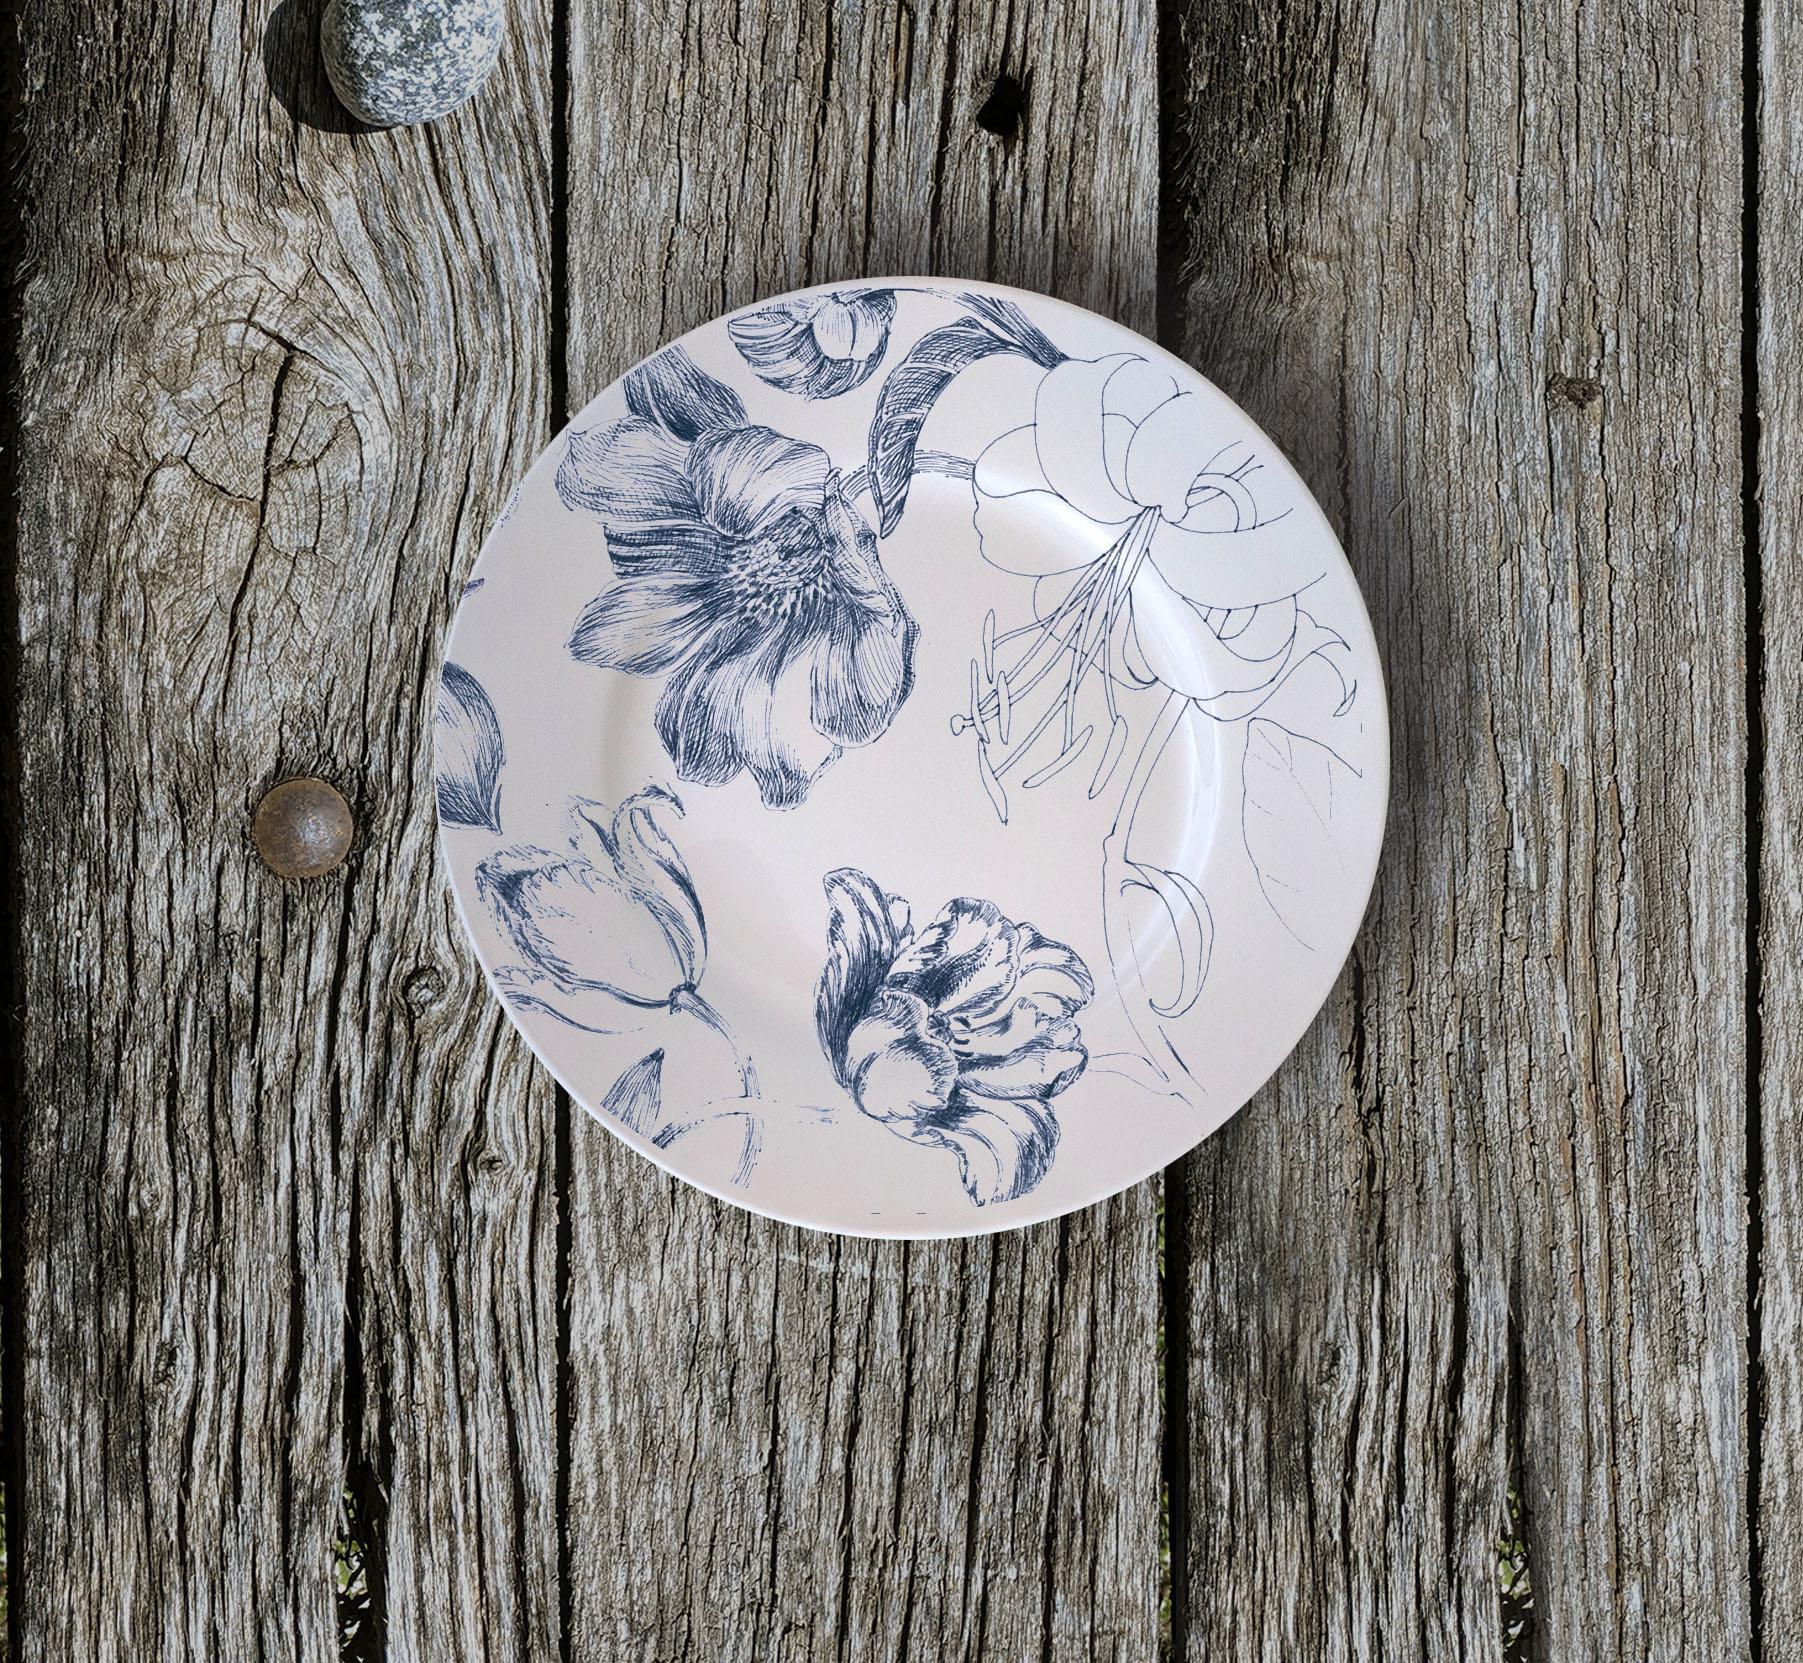 Marie Antoniette bread plates, are designed as the porcelain set of a contemporary Queen Marie Antoniette, still alive in 2020. It is an explosion of detailed flowers and blossoms, originally hand-painted with an engraving technique that is some